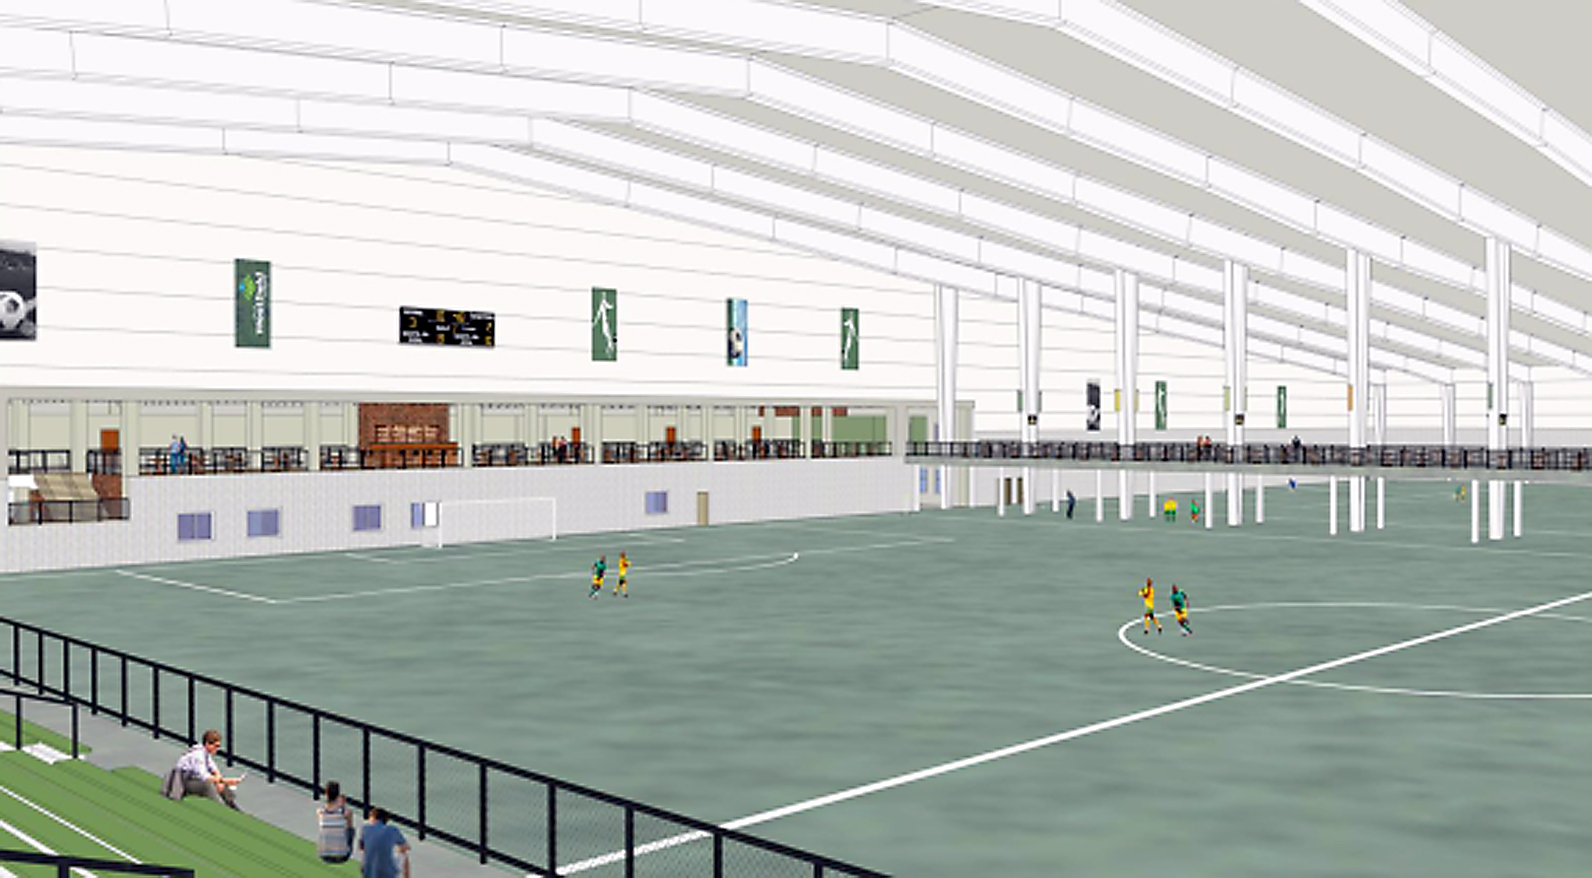 The City of Westfield has released the first inside renderings of the $25.7 million indoor sports facility at Grand Park. The proposed 372,000-square-foot facility will be built by Holladay Properties and leased to the city. (Submitted rendering)